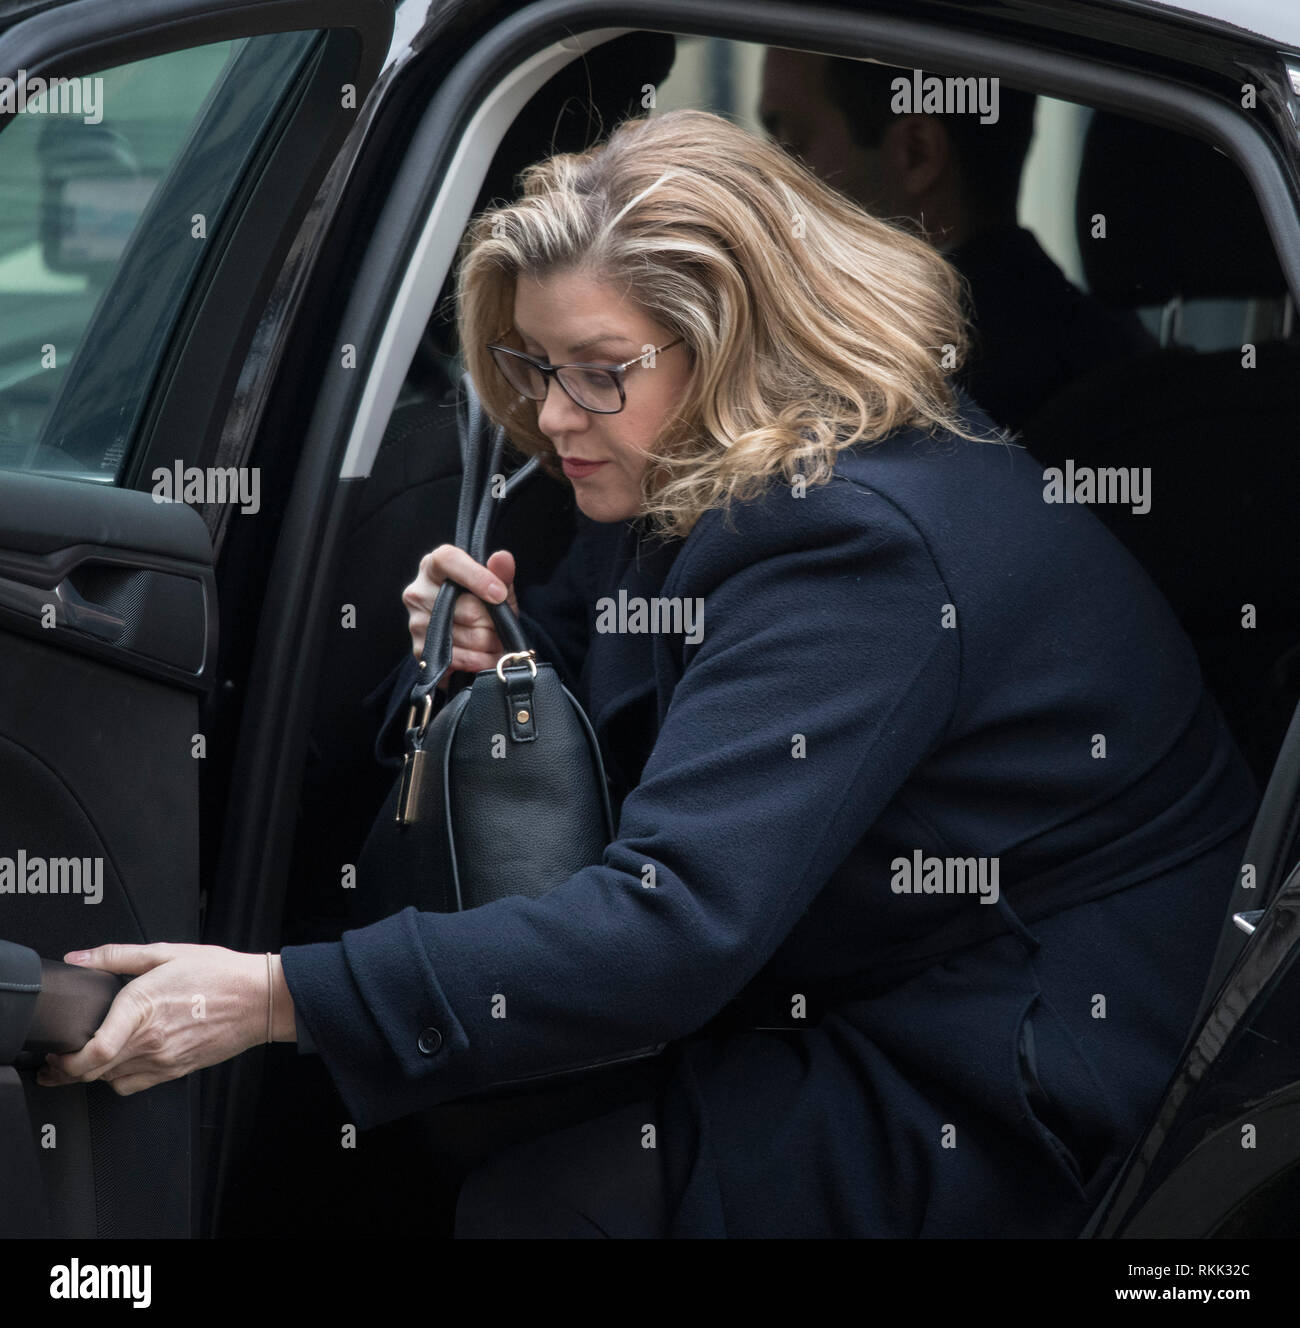 Downing Street, London, UK. 12 February 2019. Government Ministers arrive in Downing Street for weekly cabinet meeting. Penny Mordaunt, Secretary of State for International Development. Credit: Malcolm Park/Alamy Live News. Stock Photo